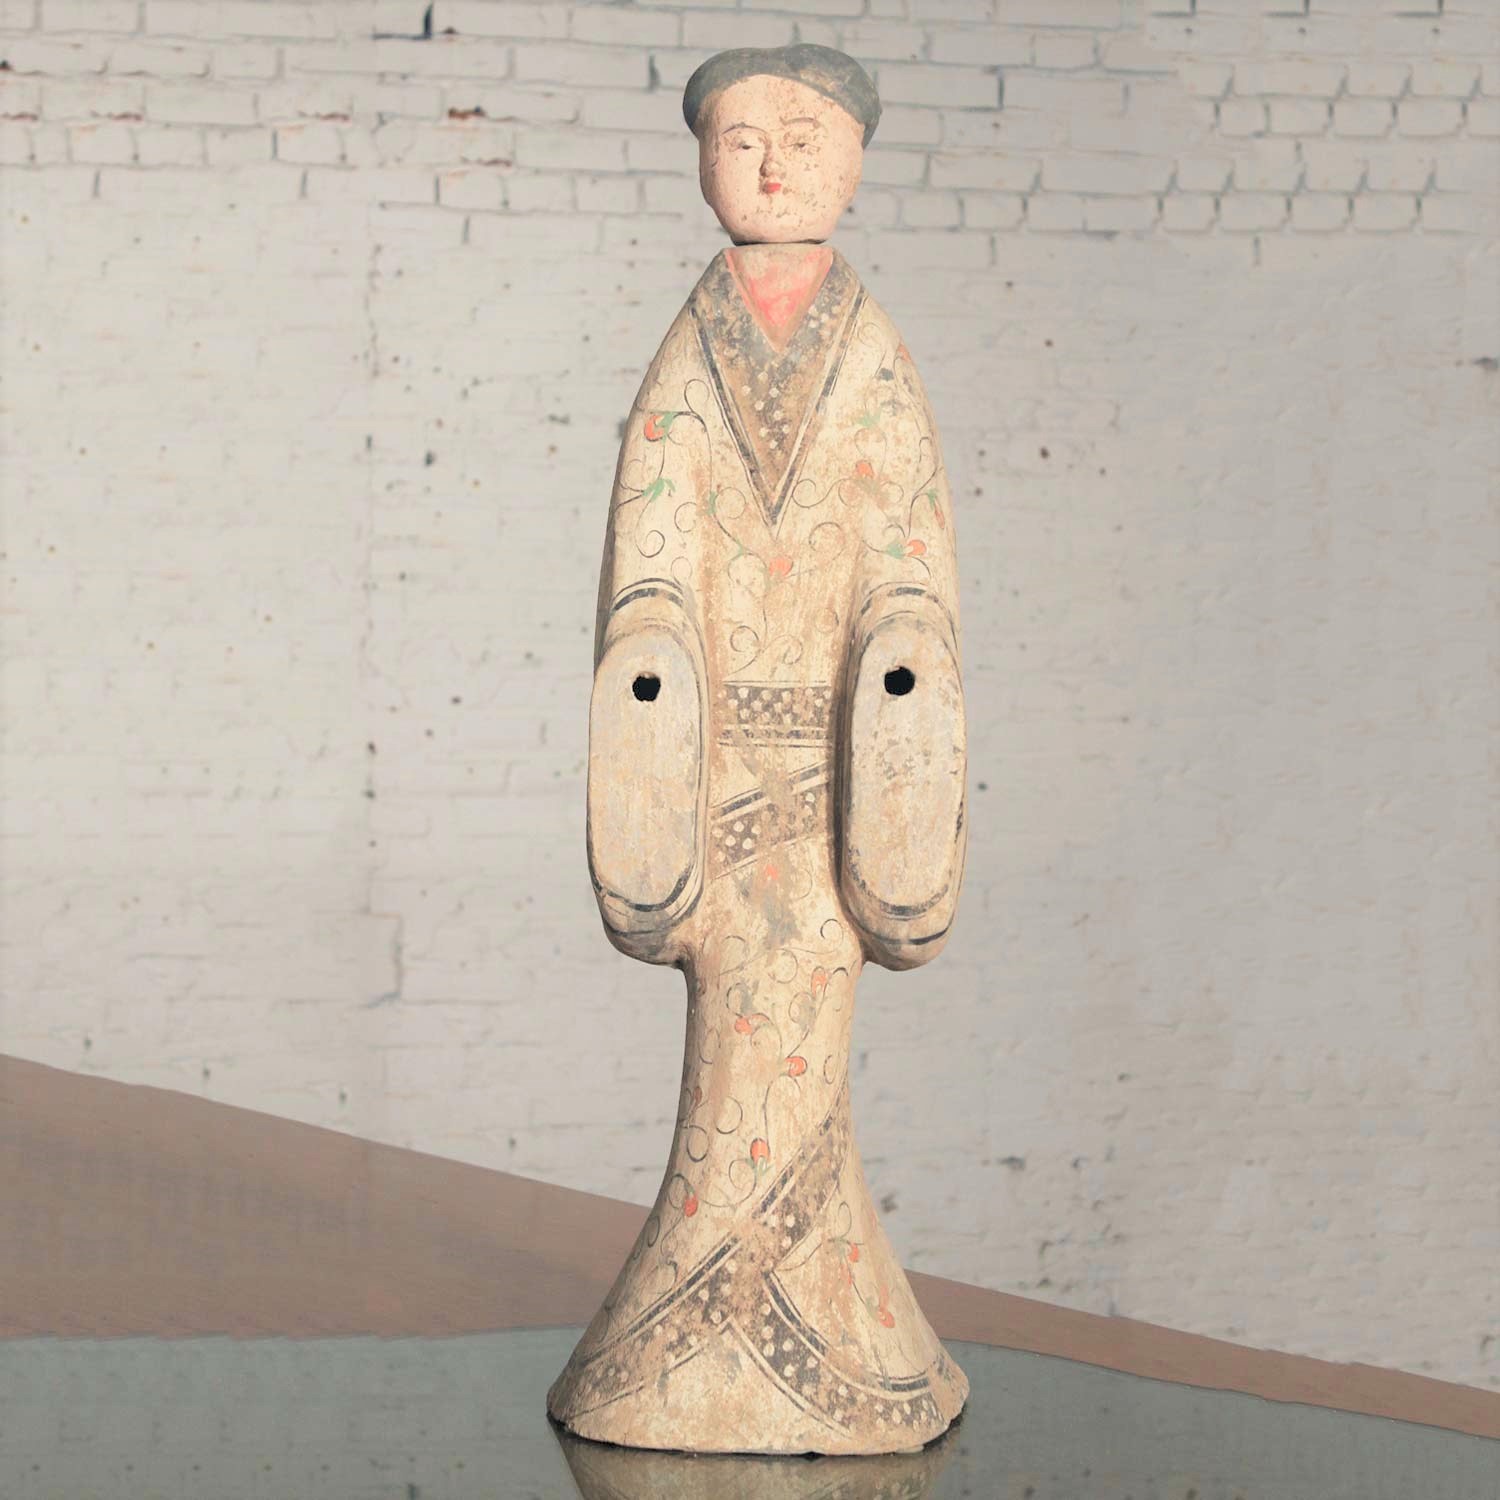 Early 20th Century Han Style Female Tomb or Funerary Pottery Figure